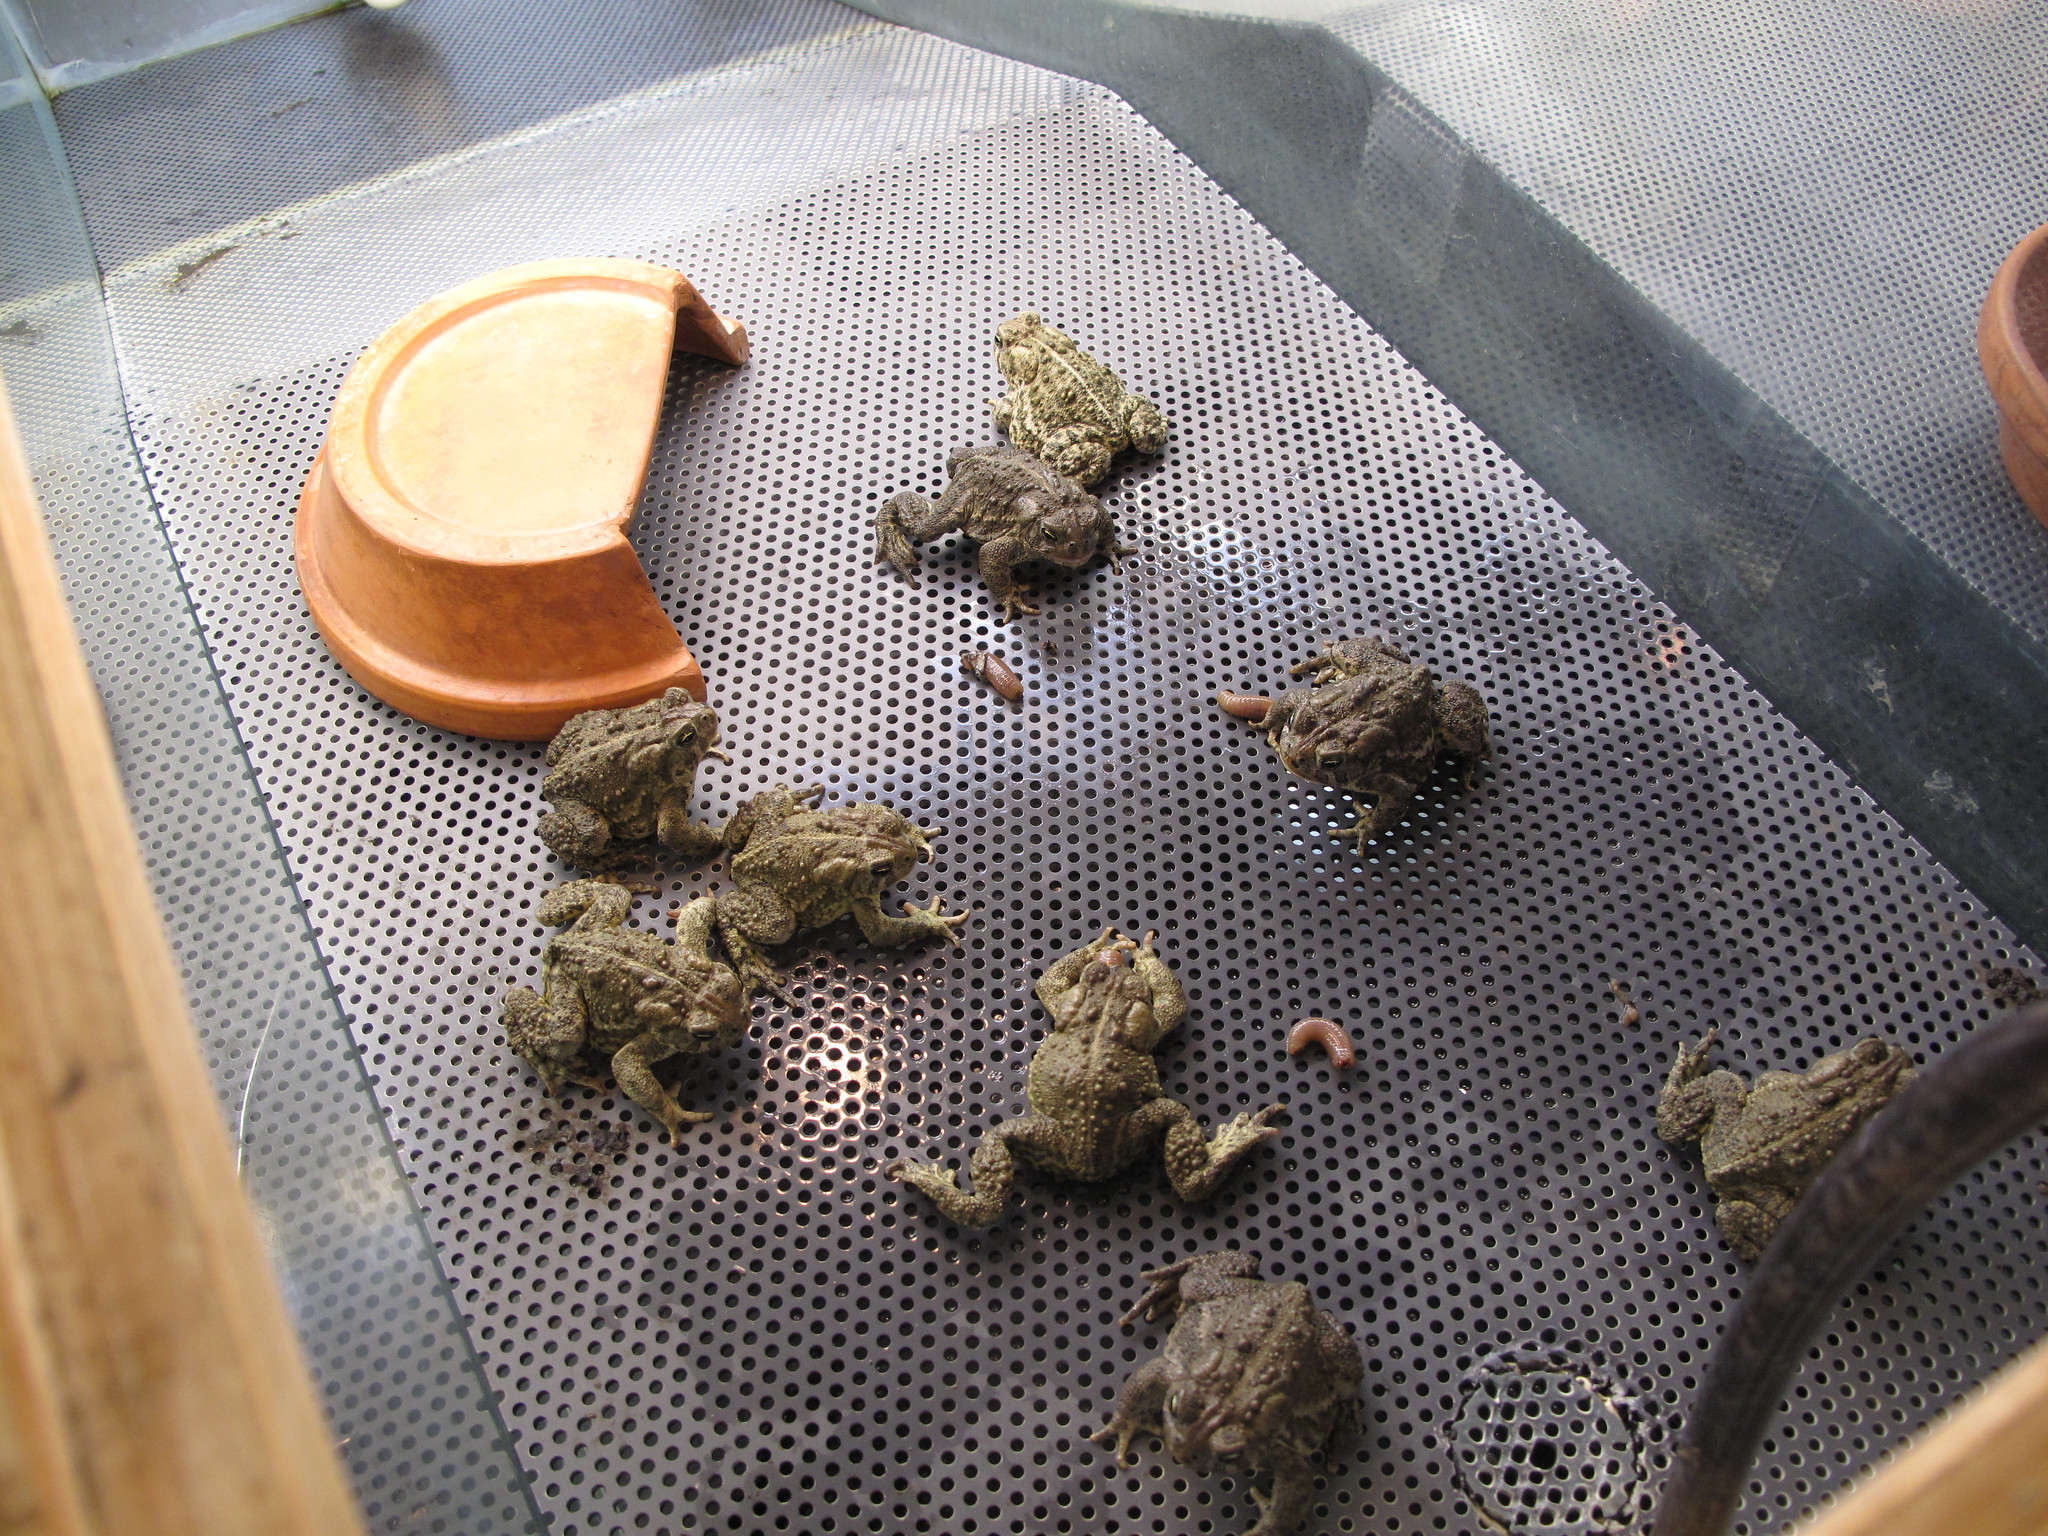 Captive Wyoming toads in a tank with worms.